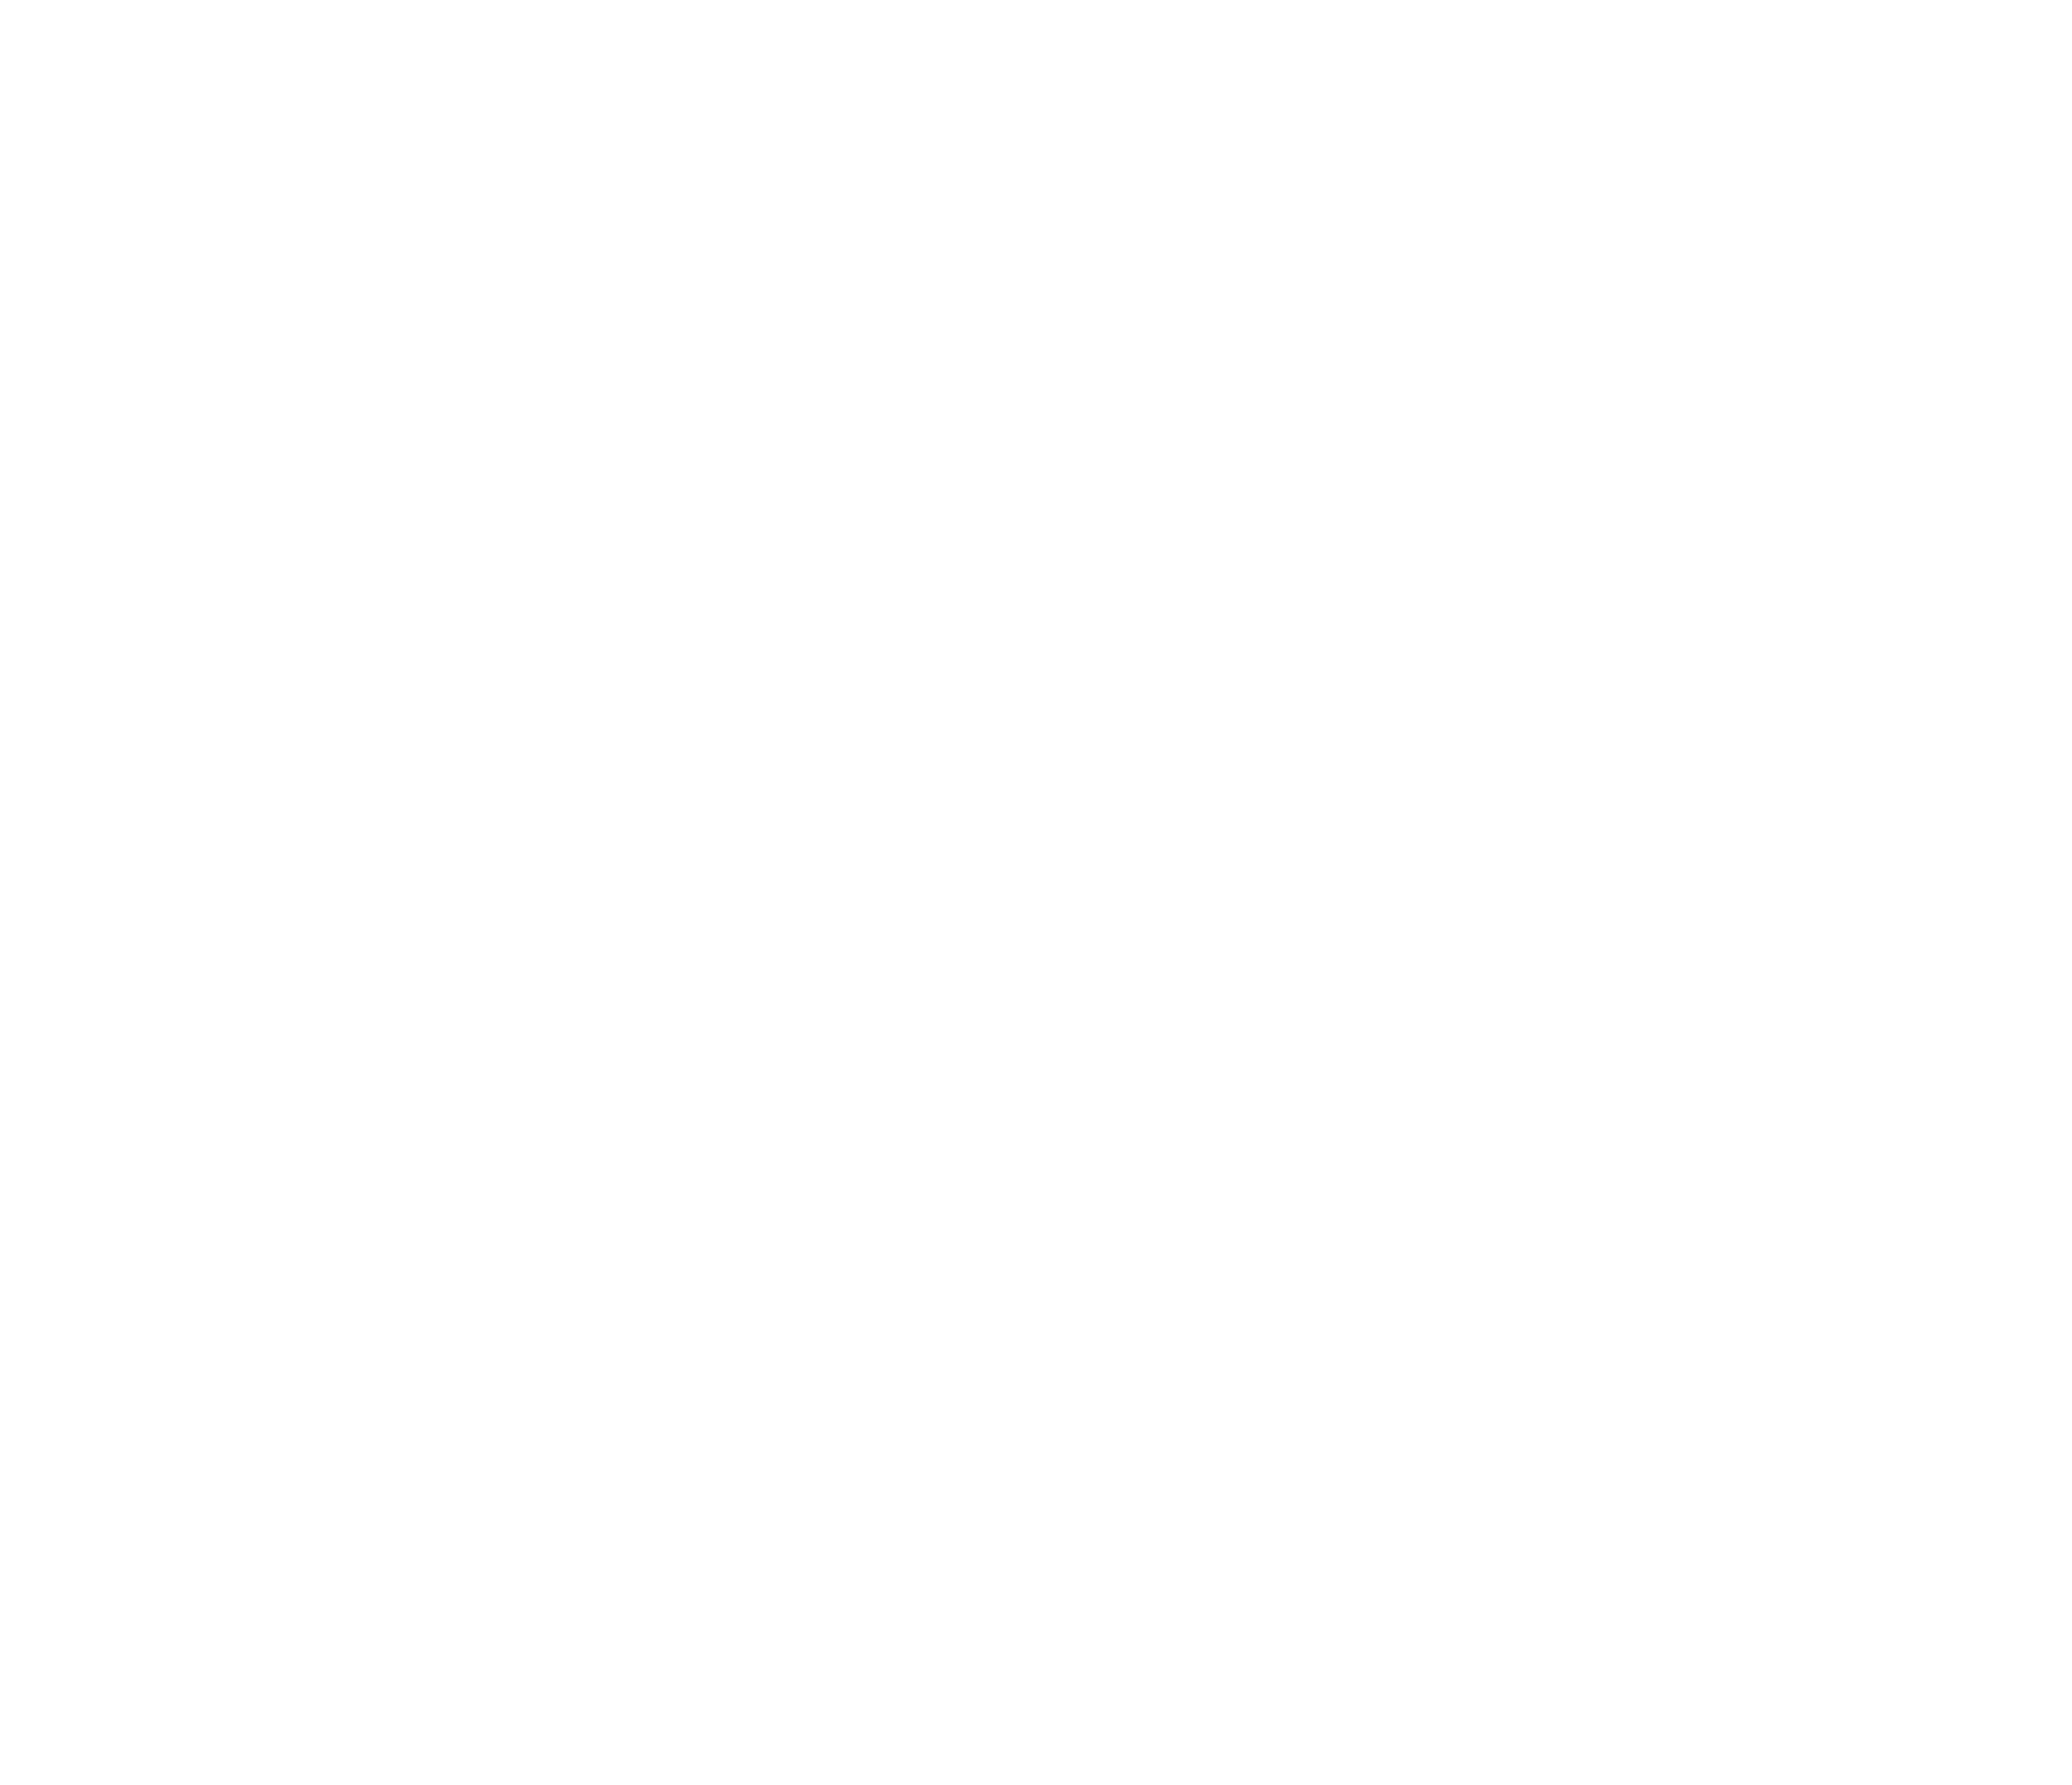 The image displays a logo for "ELITE KITCHENS + DESIGN" in white text on a dark green background, also including the word "imagine" below.